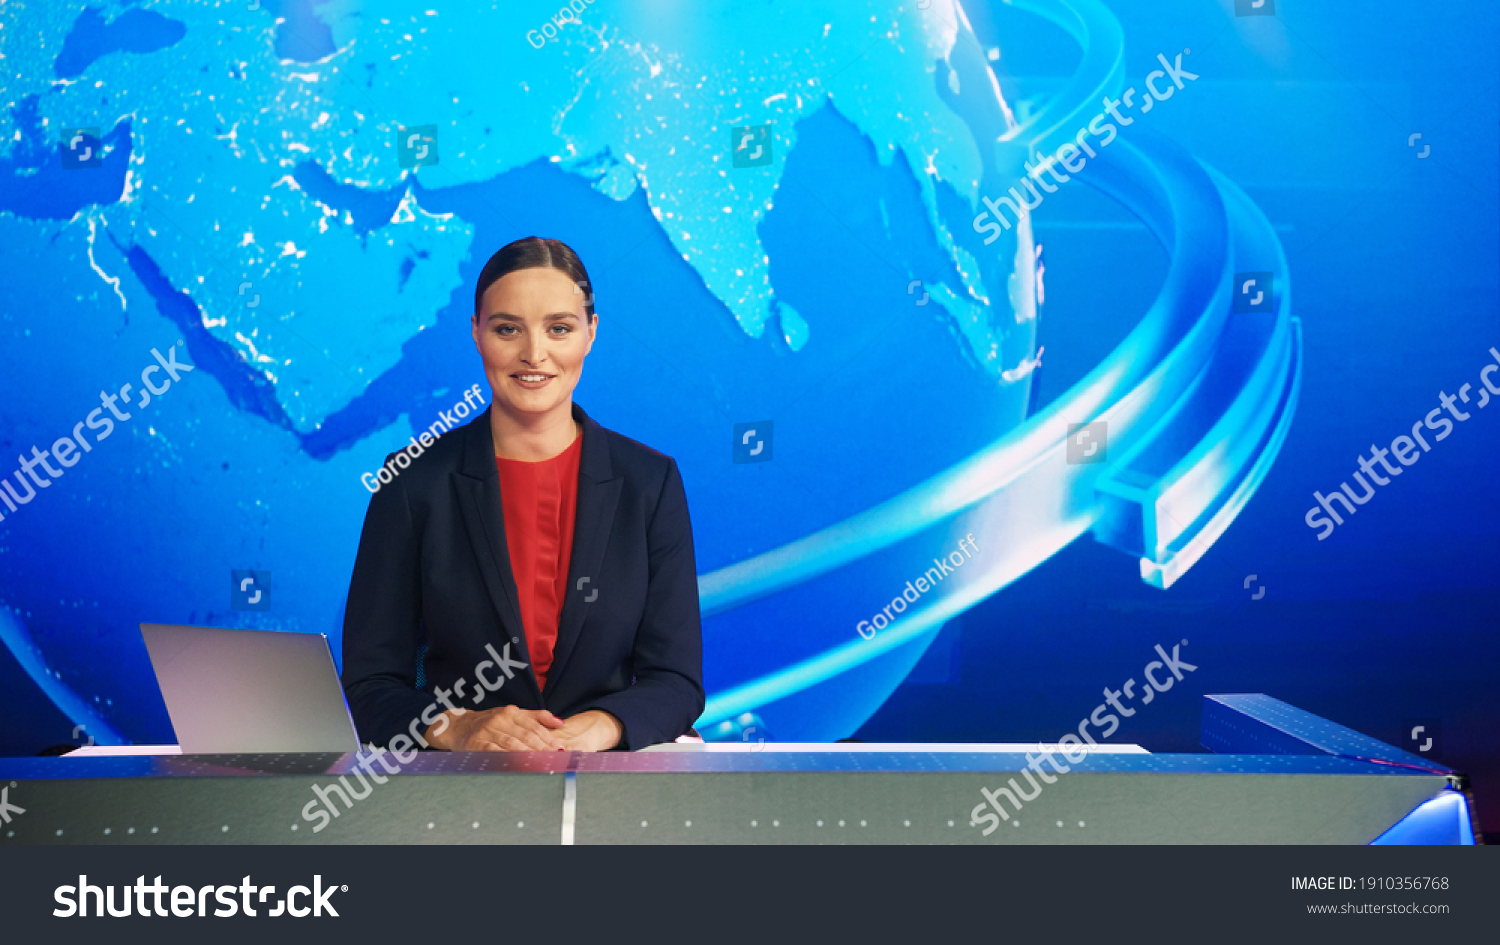 Live News Studio with Professional Female Newscaster Reporting on the Events of the Day. Broadcasting Channel with Presenter, Anchor Smiling on Camera. Mock-up TV Newsroom Set. #1910356768